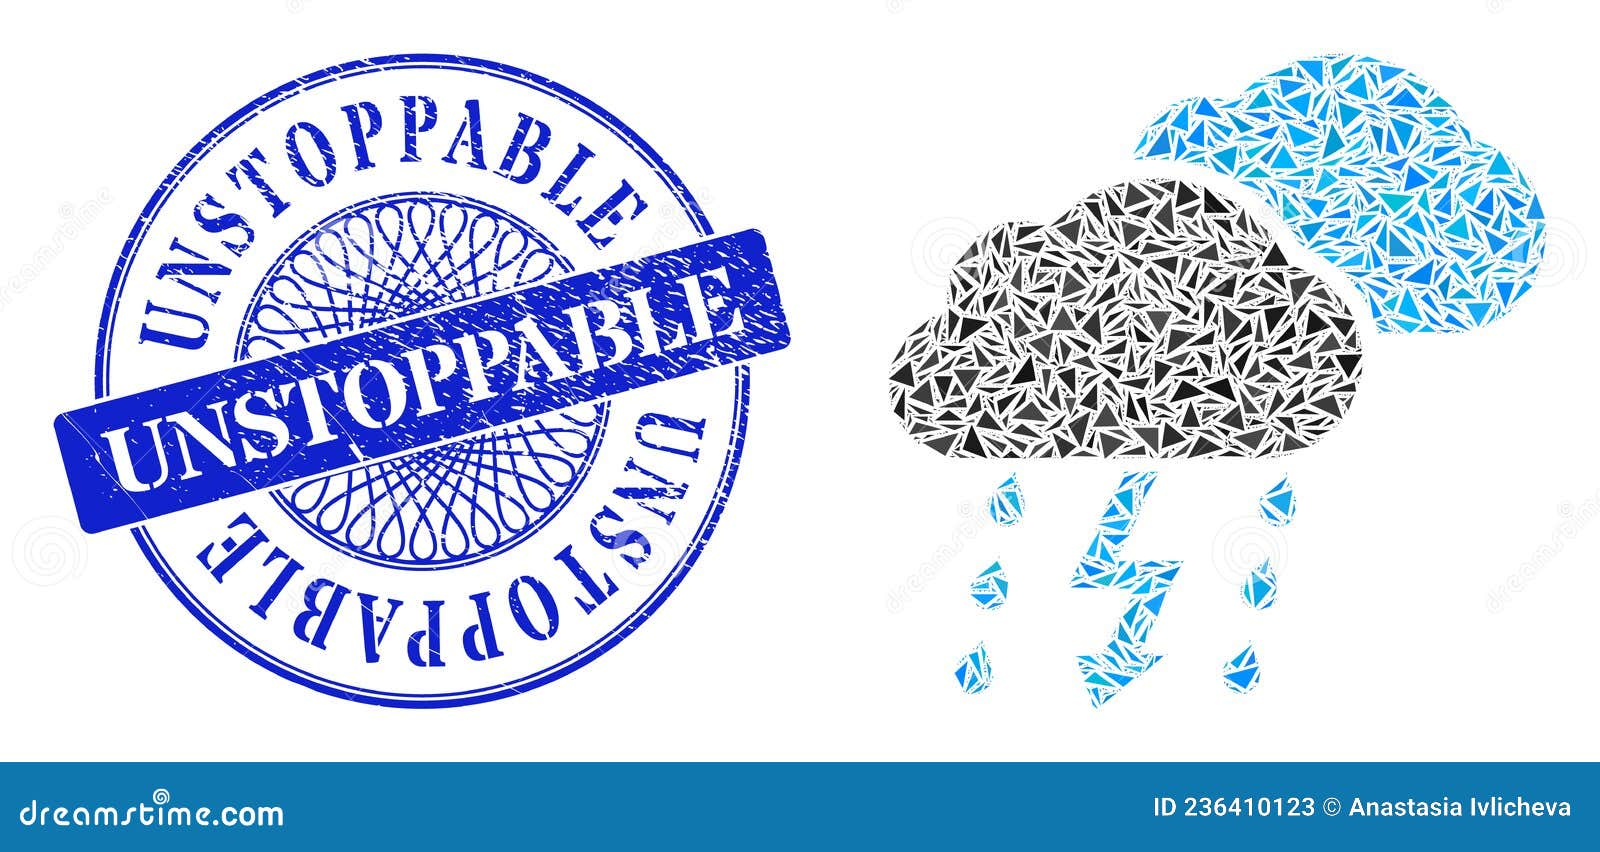 Unstoppable rubber stamp Royalty Free Vector Image